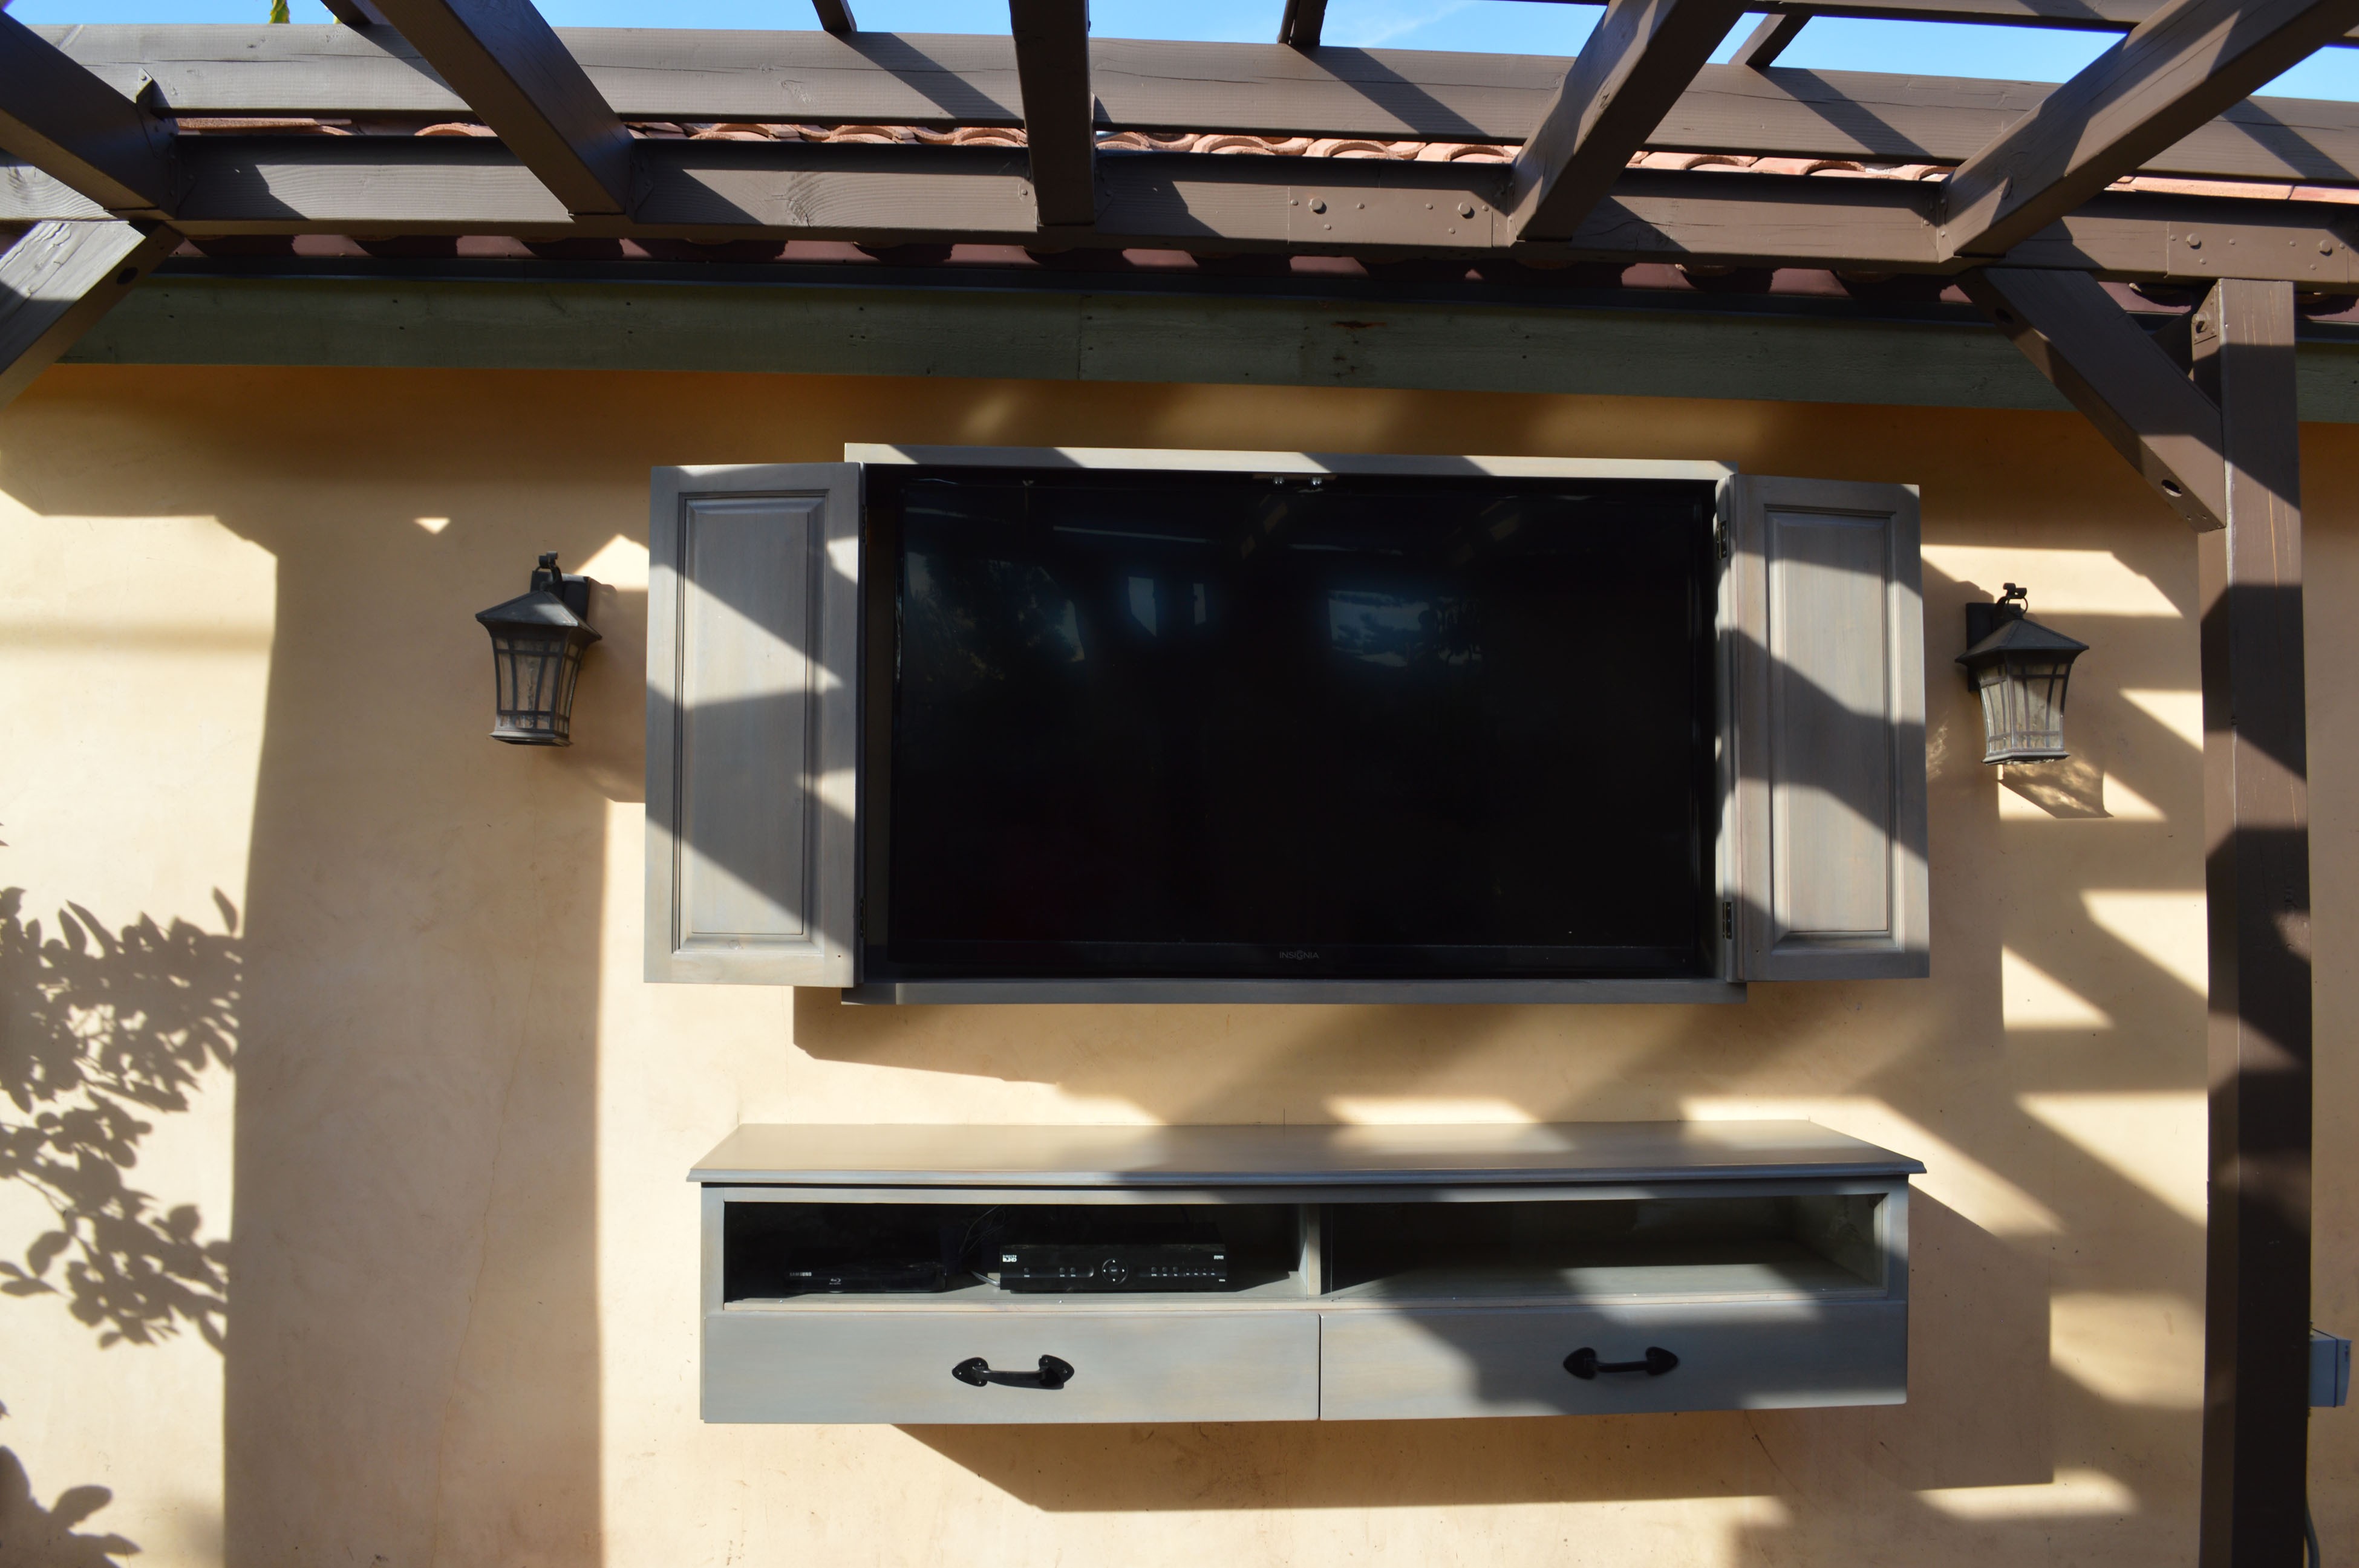 TV mounting outdoors in shade